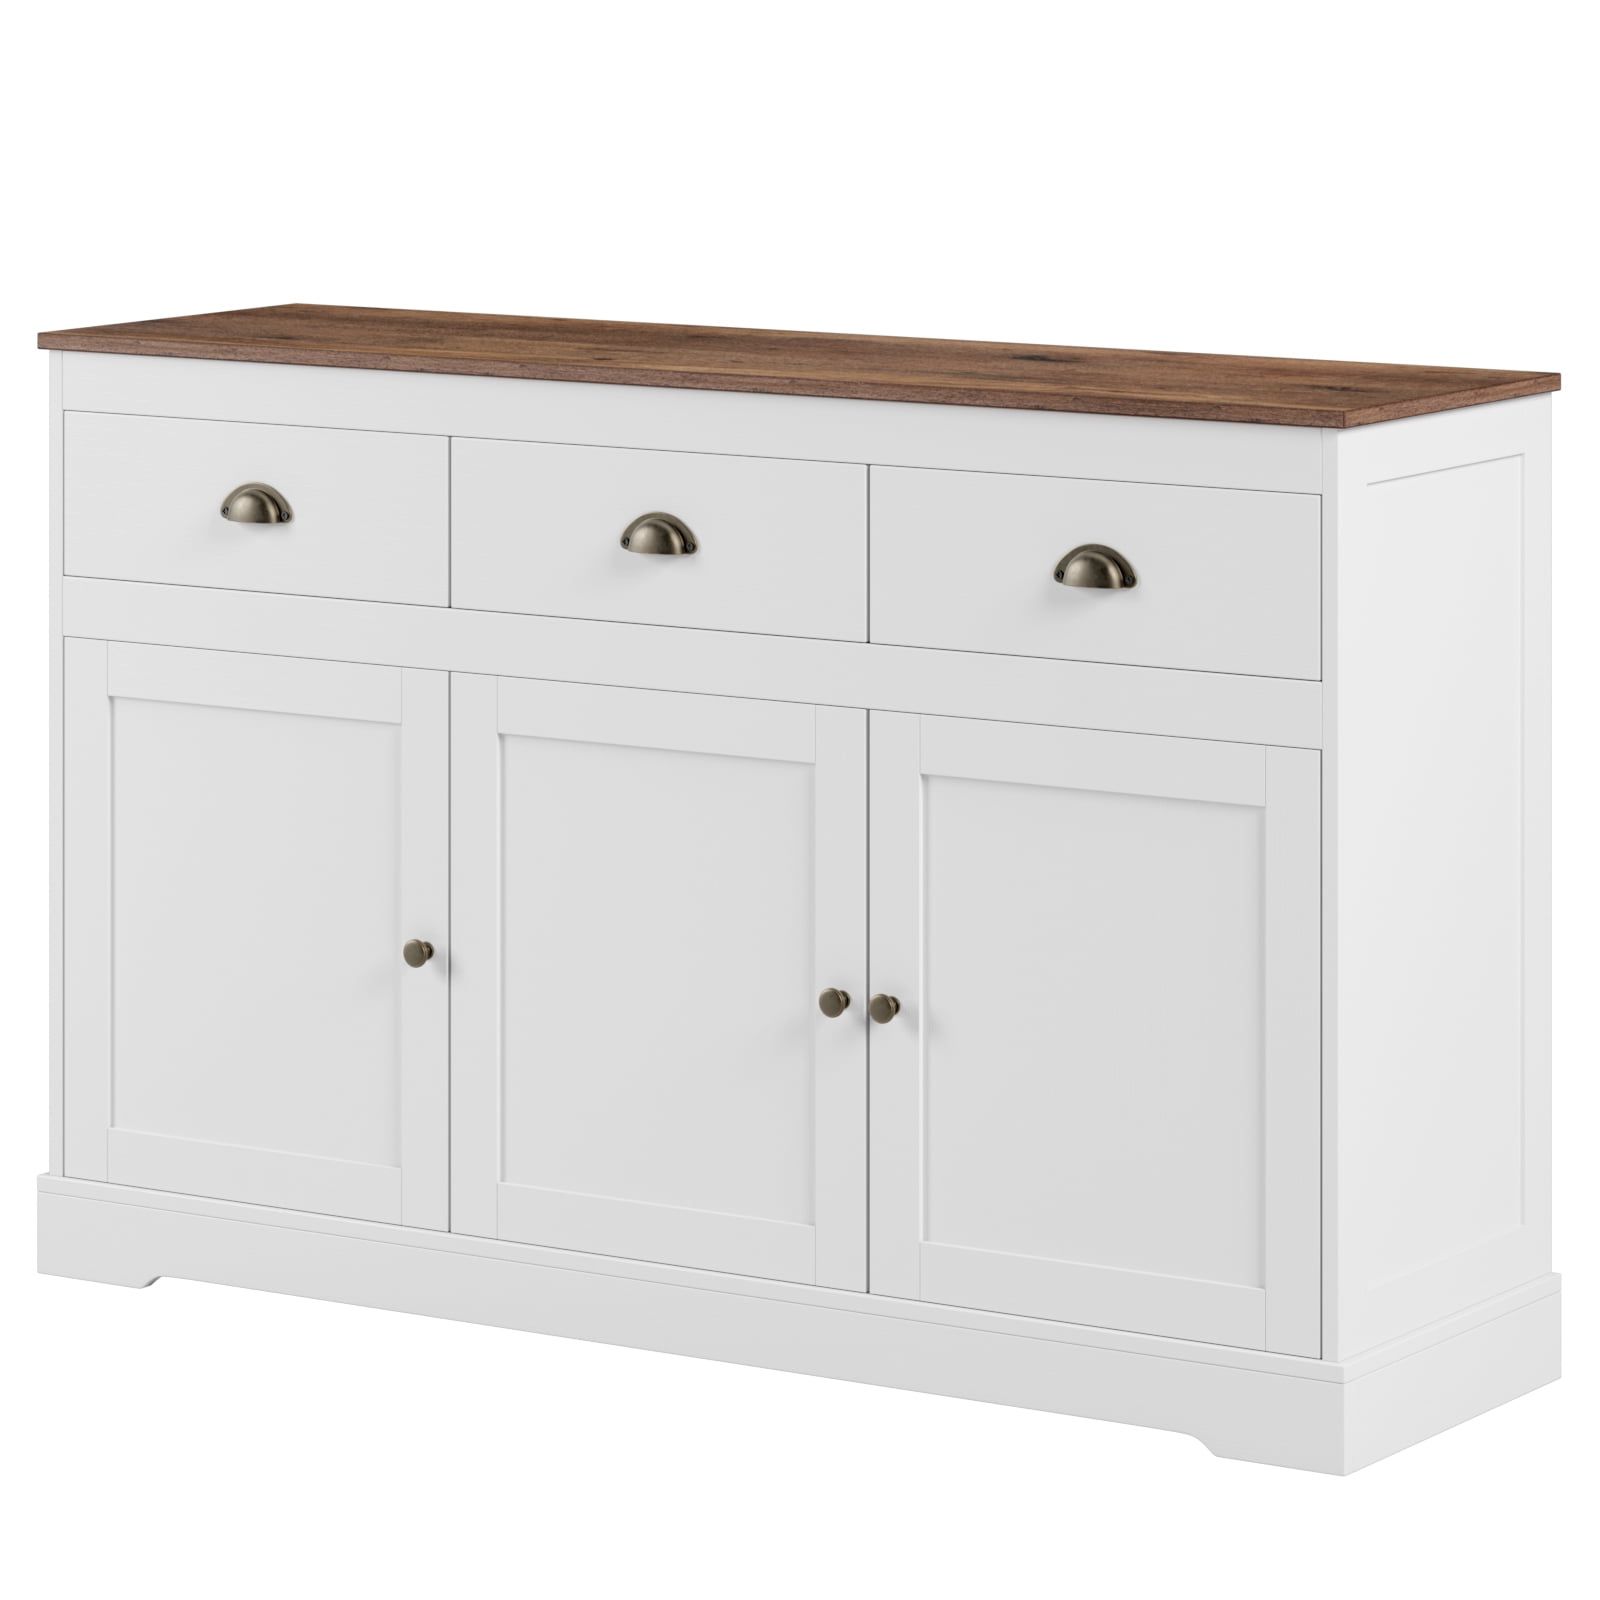 Homfa Sideboard Storage Cabinet With 3 Drawers & 3 Doors, 53.54'' Wide Buffet  Cabinet For Dining Room, White – Walmart Regarding 3 Drawers Sideboards Storage Cabinet (Gallery 10 of 20)